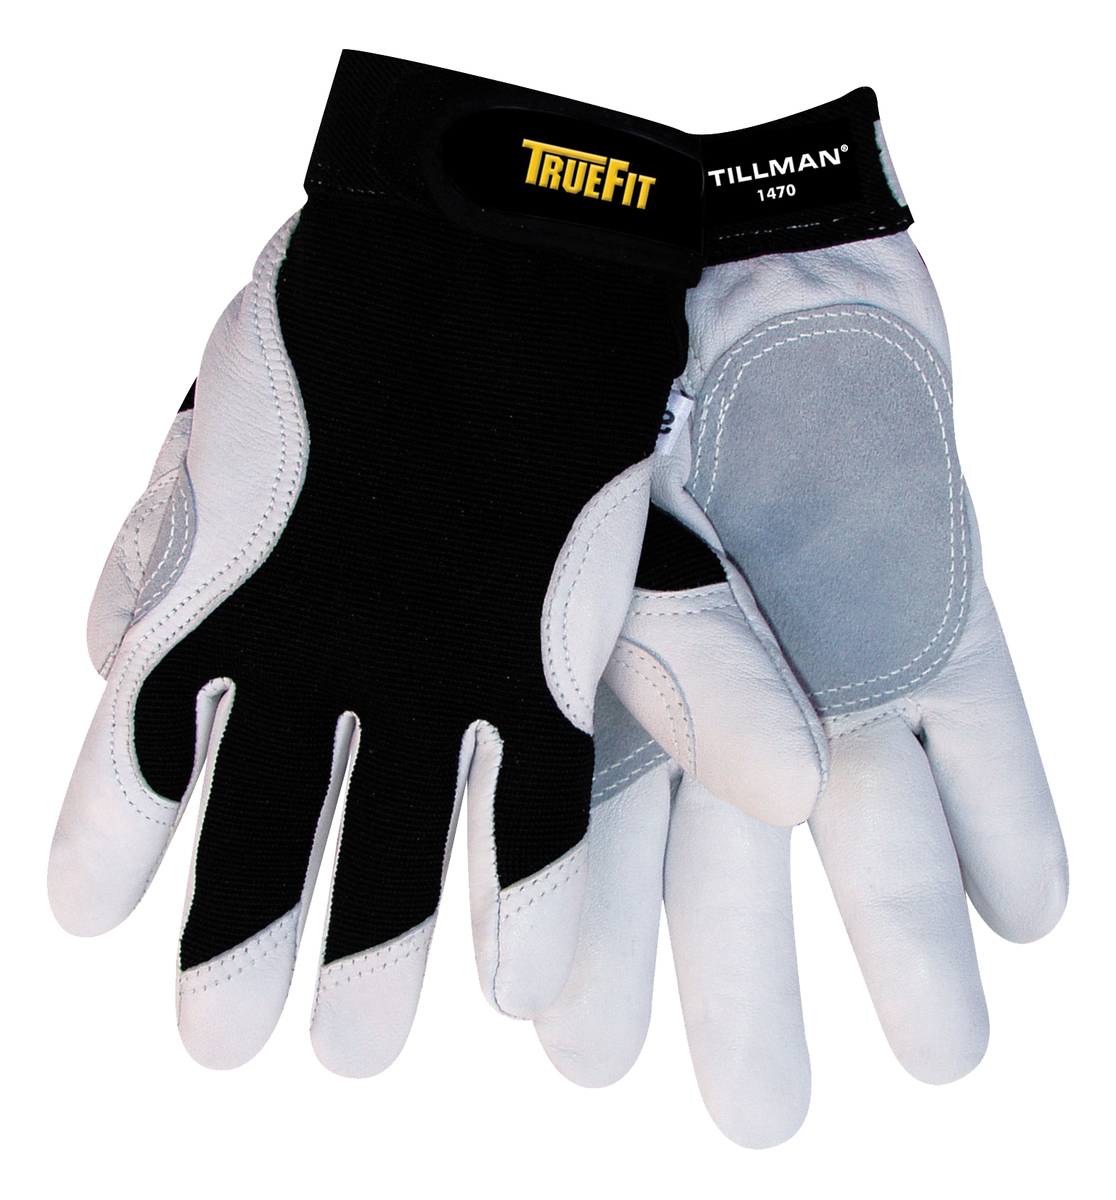 Tillman® Large Black And White TrueFit™ Goatskin And Spandex® Full Finger Mechanics Gloves With Elastic/Hook And Loop Cuff